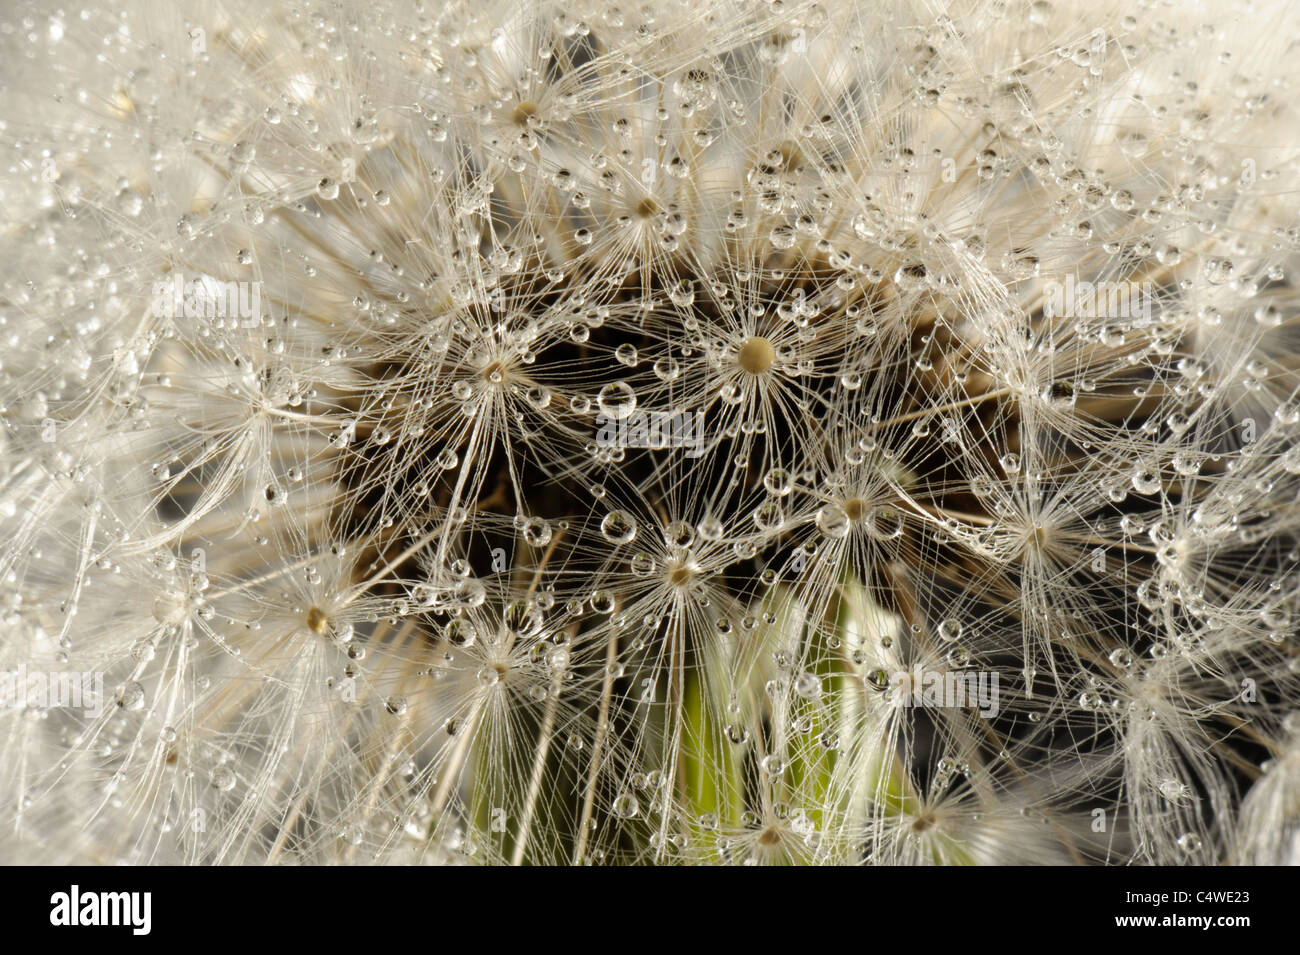 Parachutes or pappus of a dandelion (Taraxacum officinale) covered with fine mist droplets Stock Photo